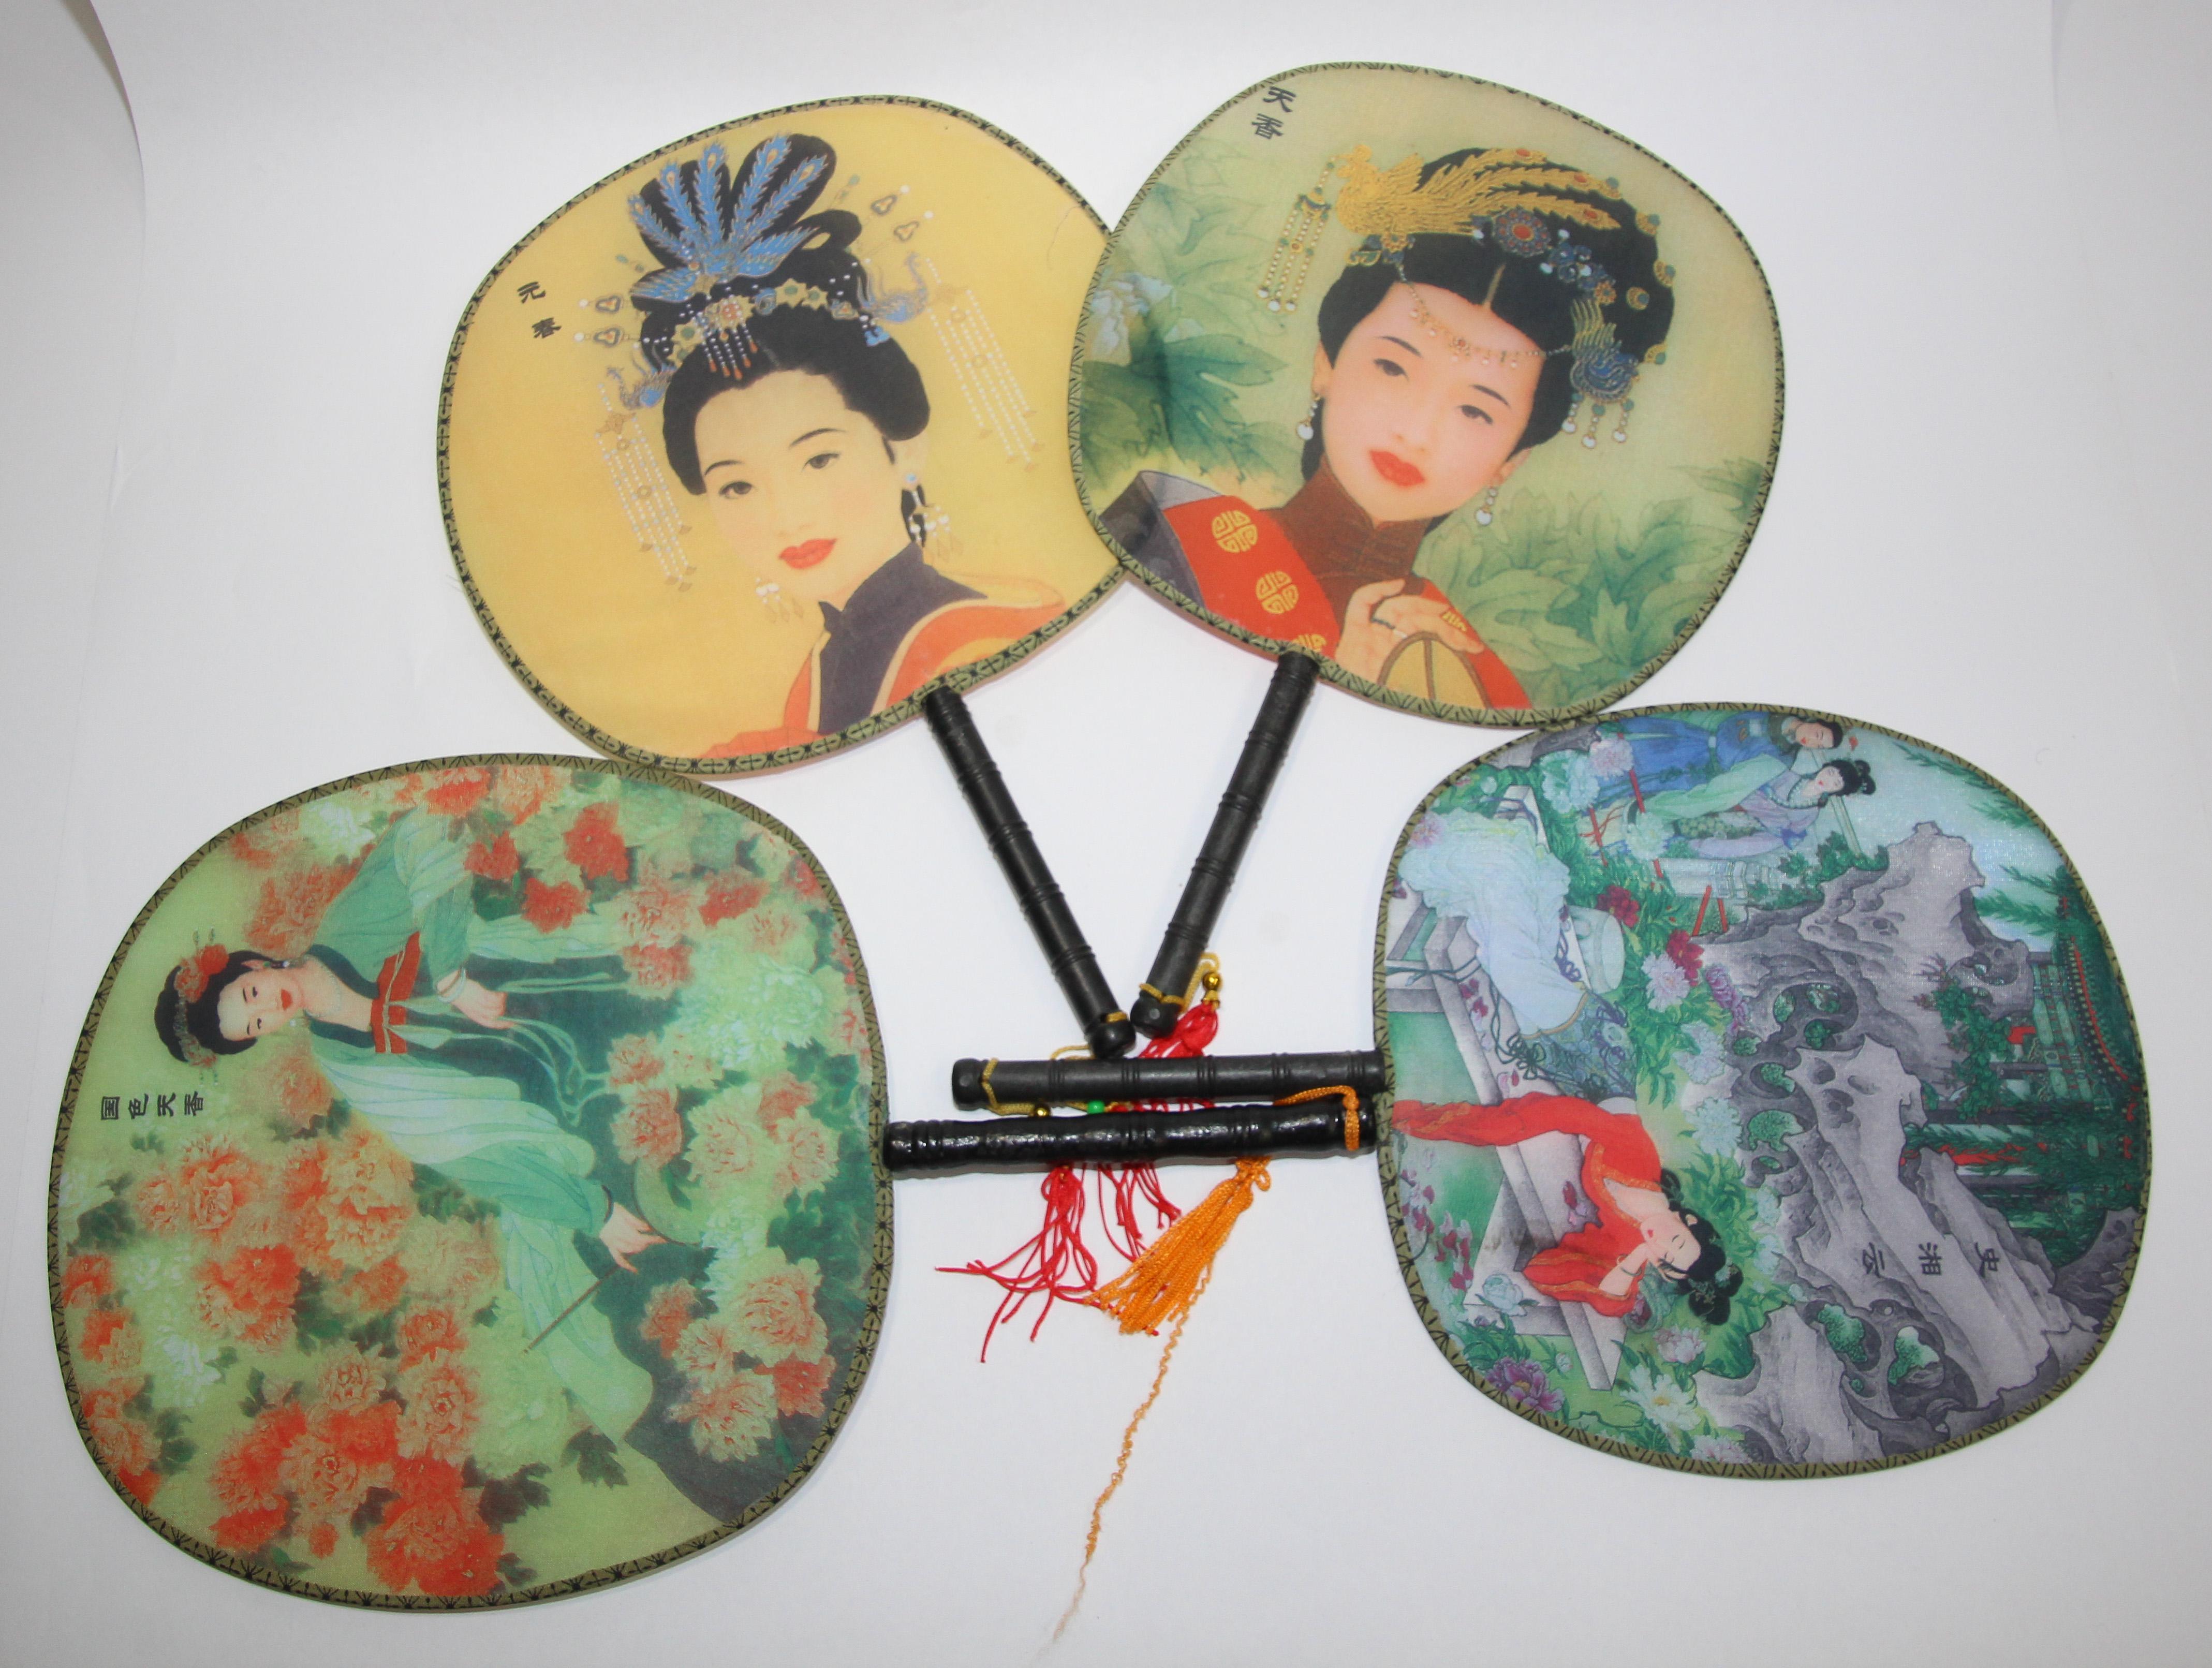 Set of 5 Chinese silk round fans, hand fans with geisha woman painting.
Vintage Asian hand fans decorated with printed Geisha Women and Chinese landscape.
Chinoiserie silk paddle fans with floral and figures details designs, wooden bamboo handle and